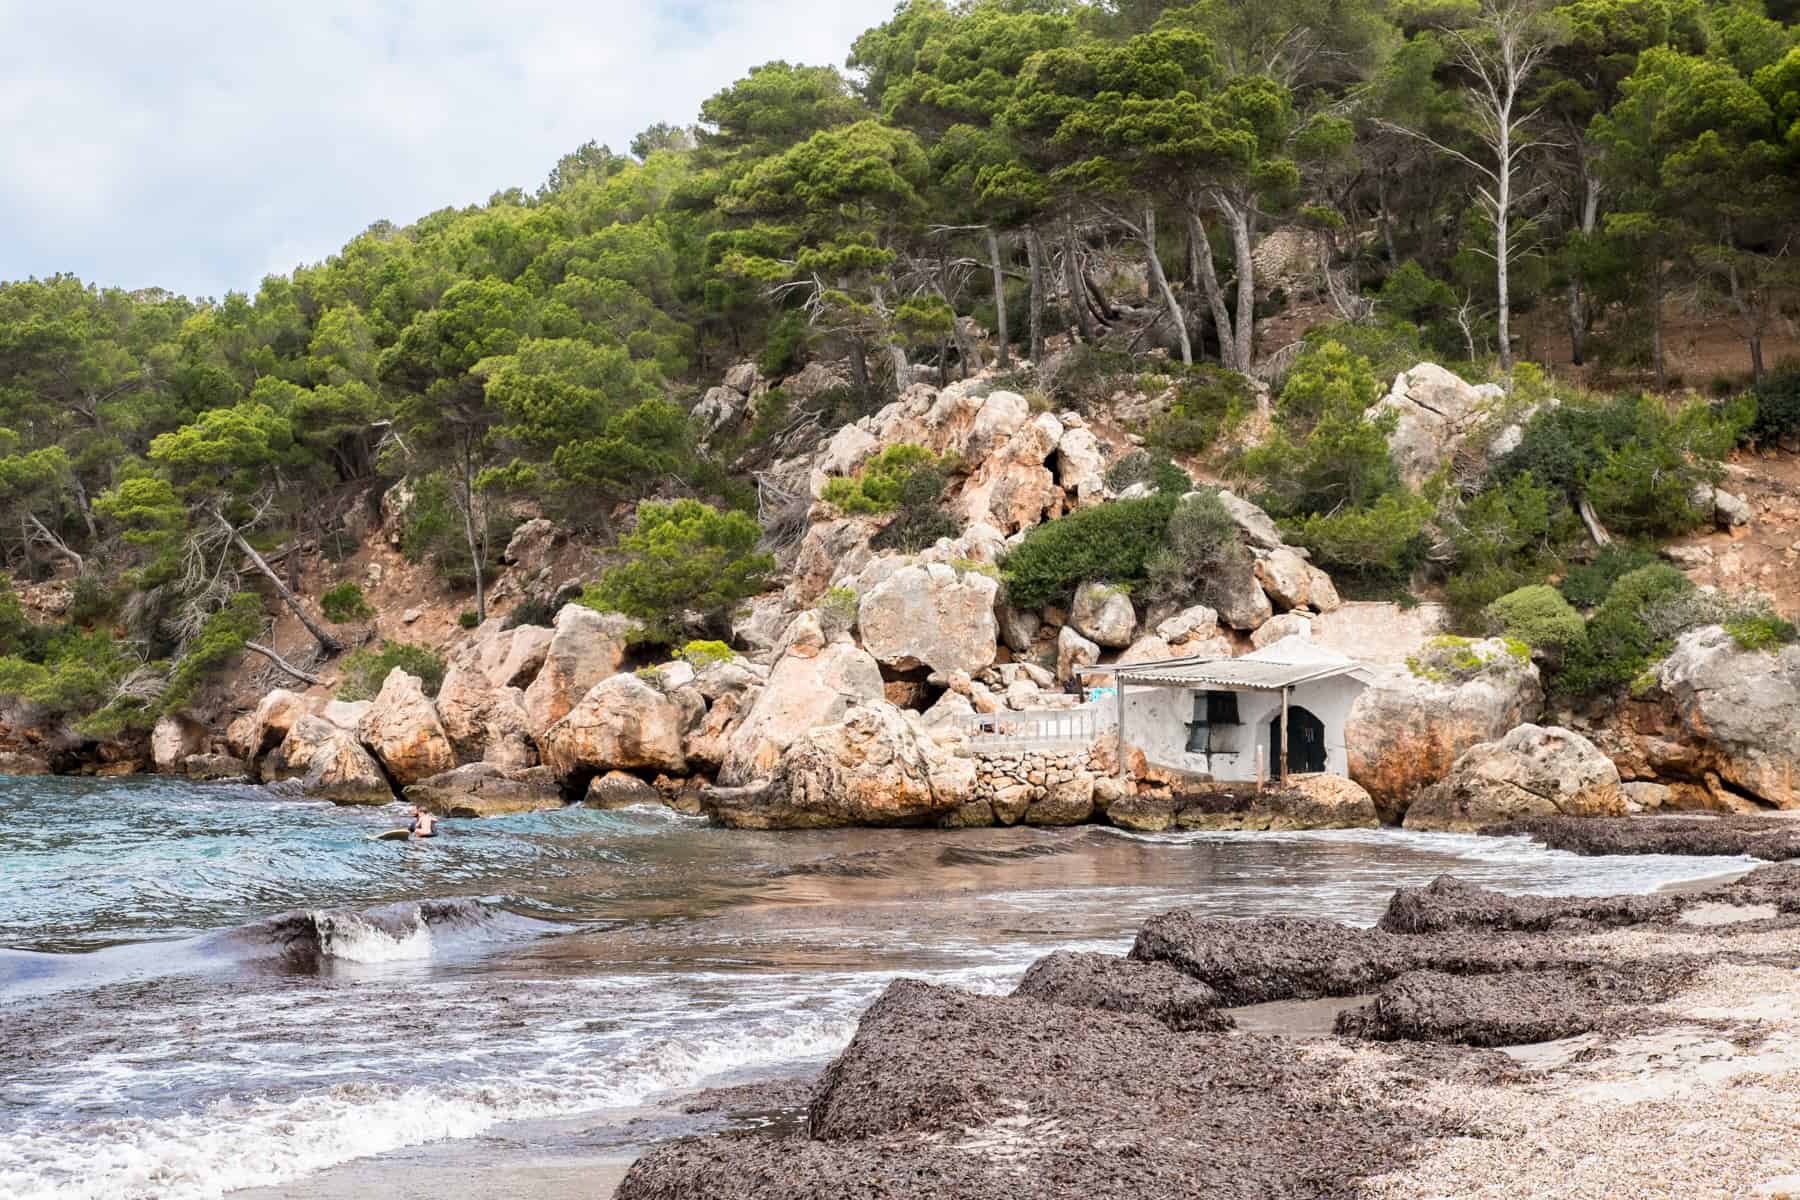 A rocky beach cove surrounded by dense green forest in Menorca, Balearic Islands. 